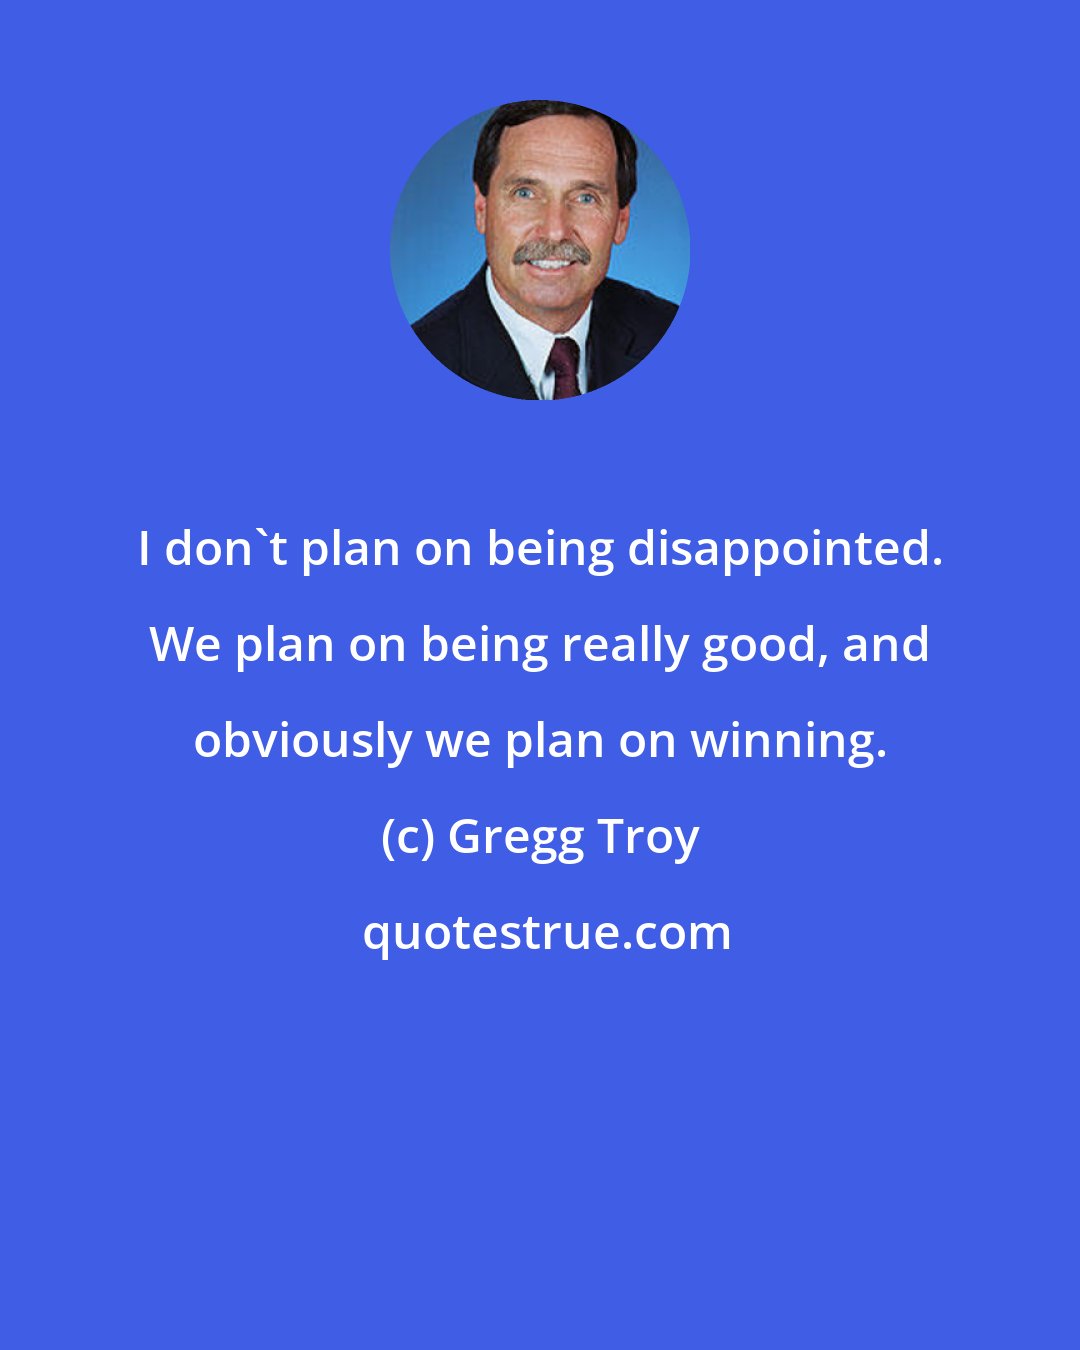 Gregg Troy: I don't plan on being disappointed. We plan on being really good, and obviously we plan on winning.